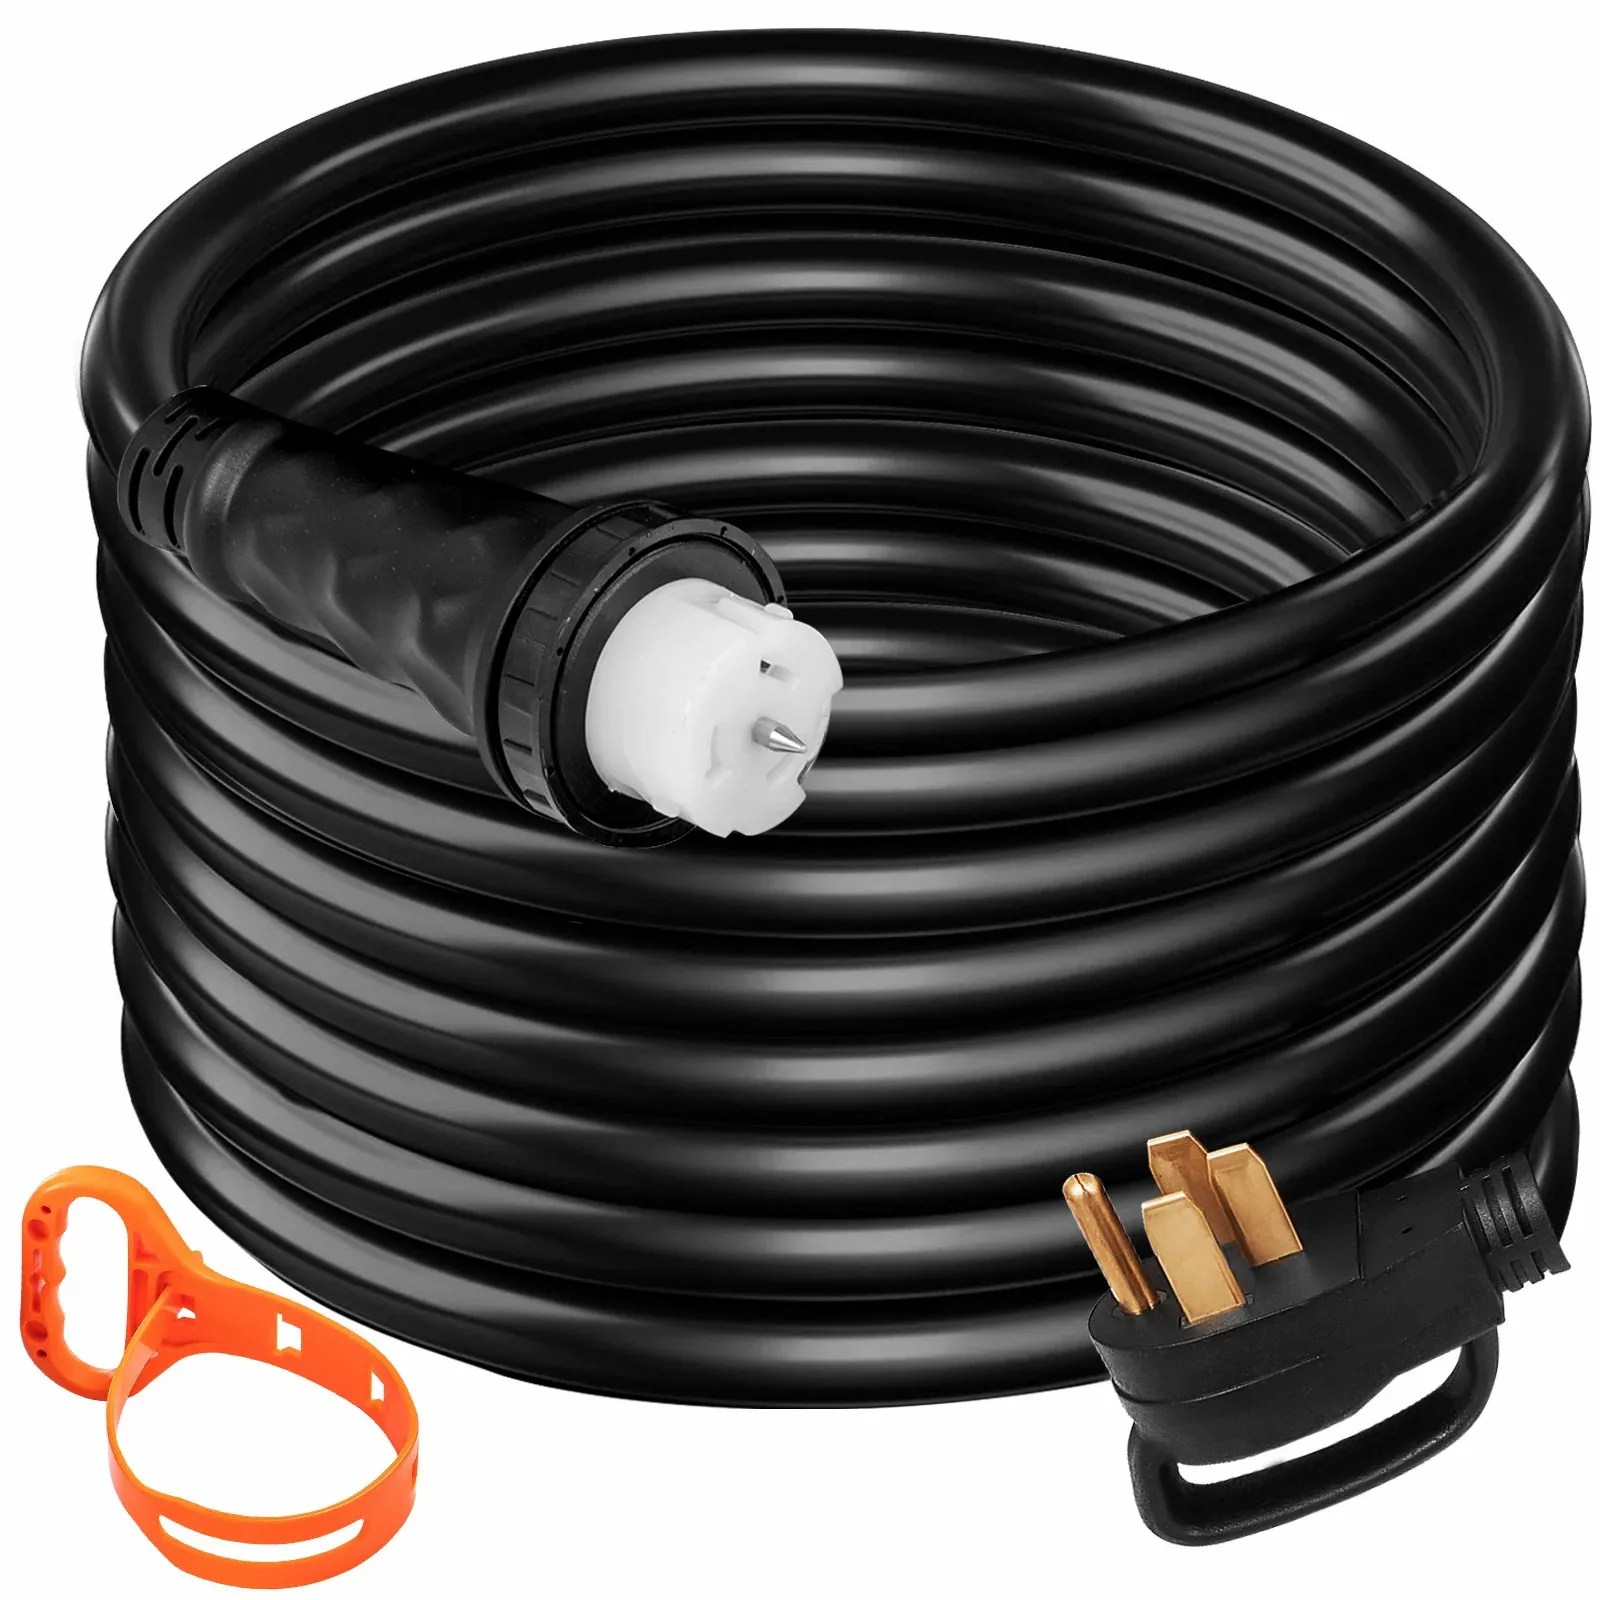 

10Ft 50 Amp Generator Extension Cord STW 6/3 + 8/1 Generator Cord 125V 250V UL Listed Generator Power Cord N14-50P & SS2-50R